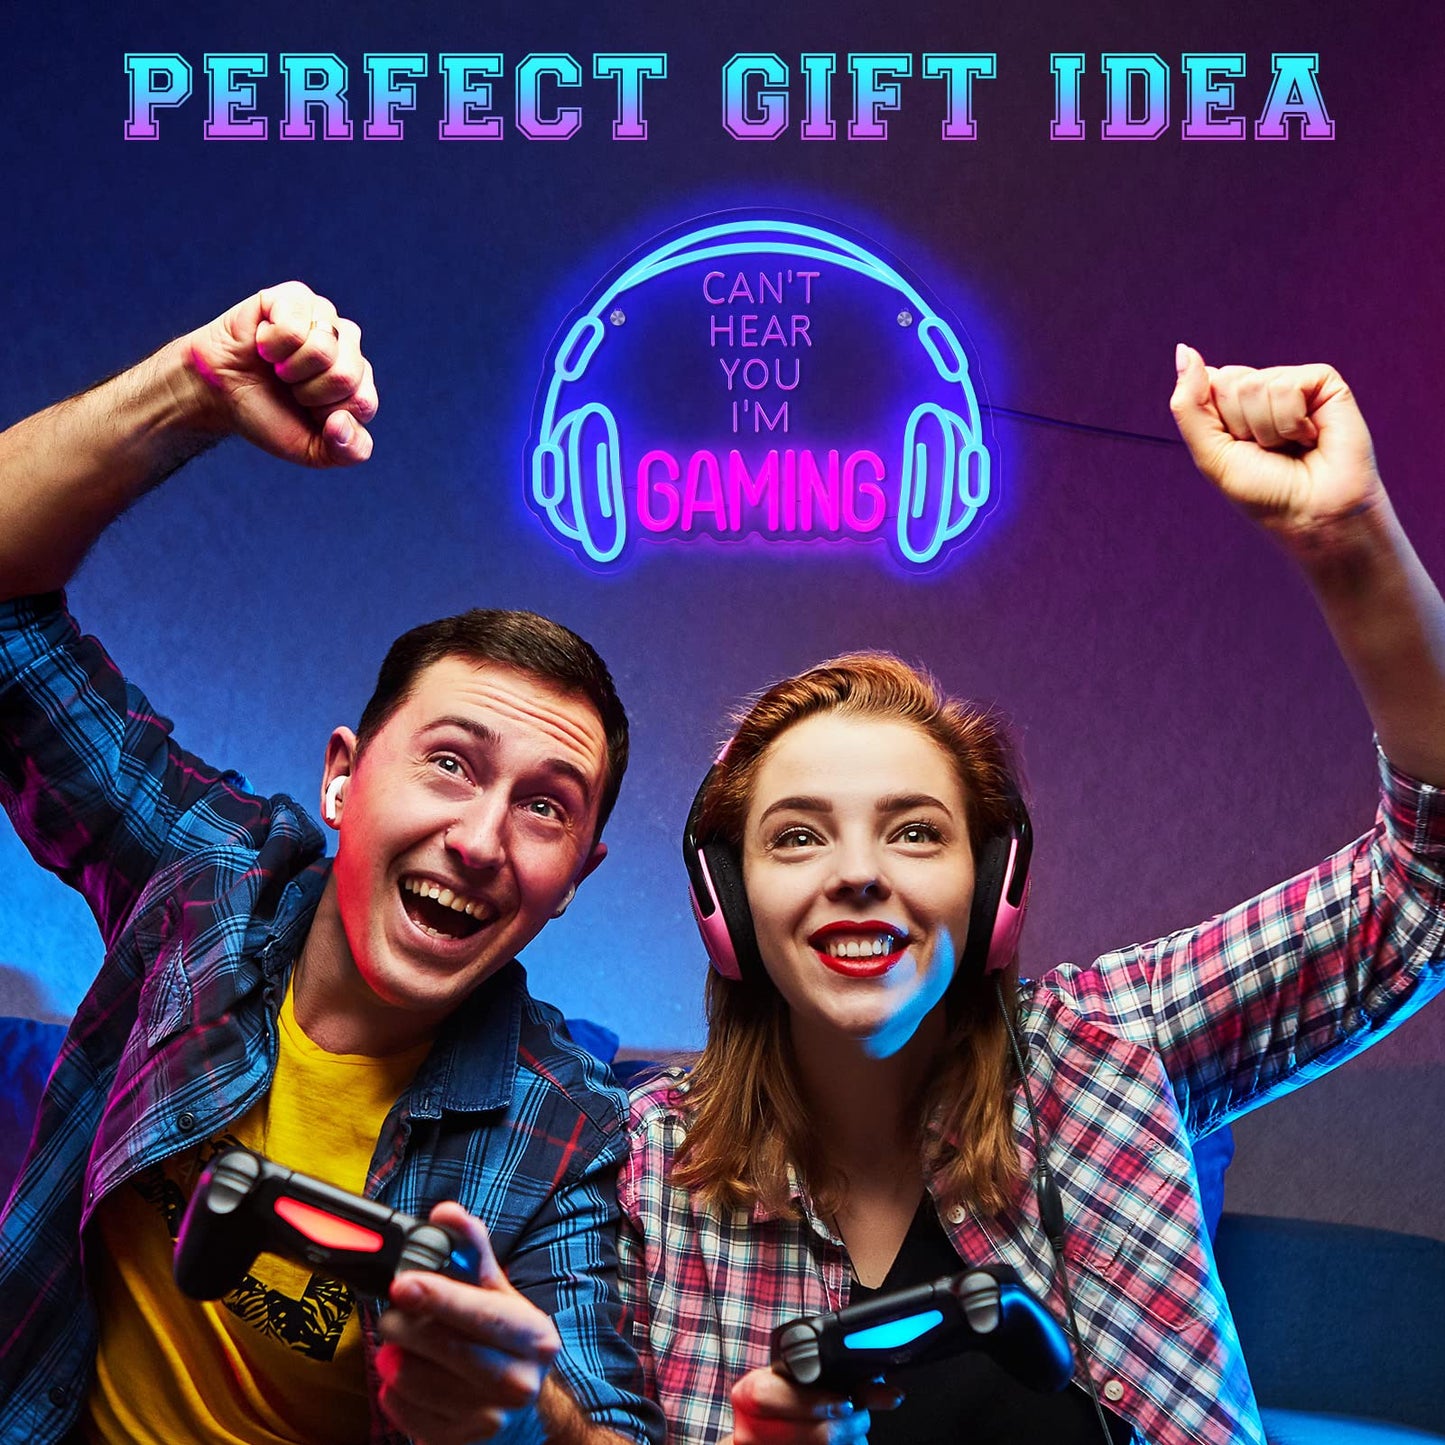 ReyeeInc Gaming Headset Neon Sign, Large Bright and Dimmable Colorful LED Game Headphone Neon Light and USB Powered Lightup Signs for Gamer Zone Video Room Bedroom Wall Art Decor (15.7 * 11.8") - amzGamess